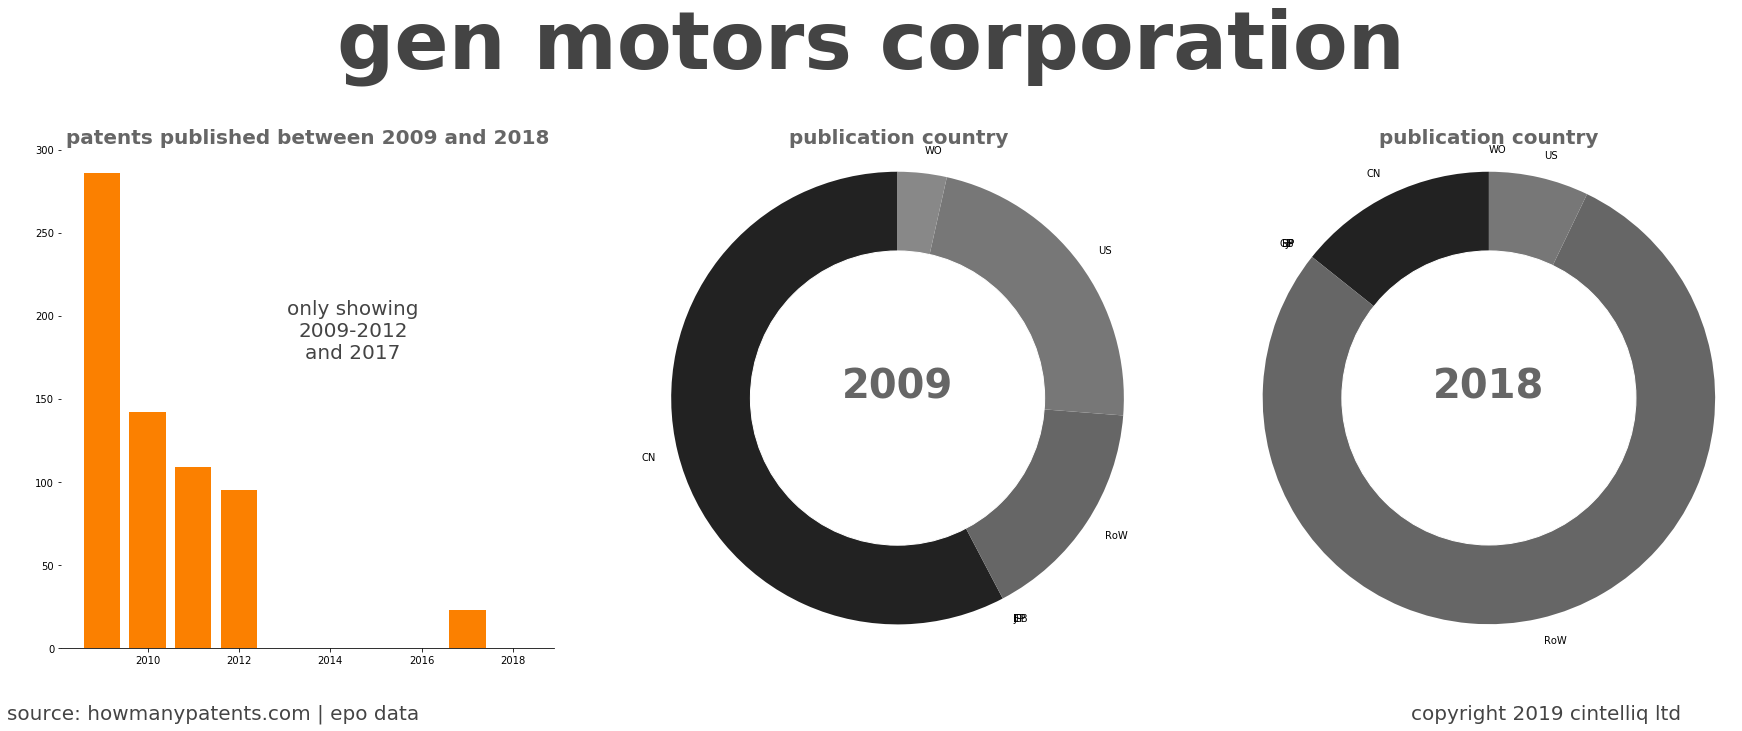 summary of patents for Gen Motors Corporation